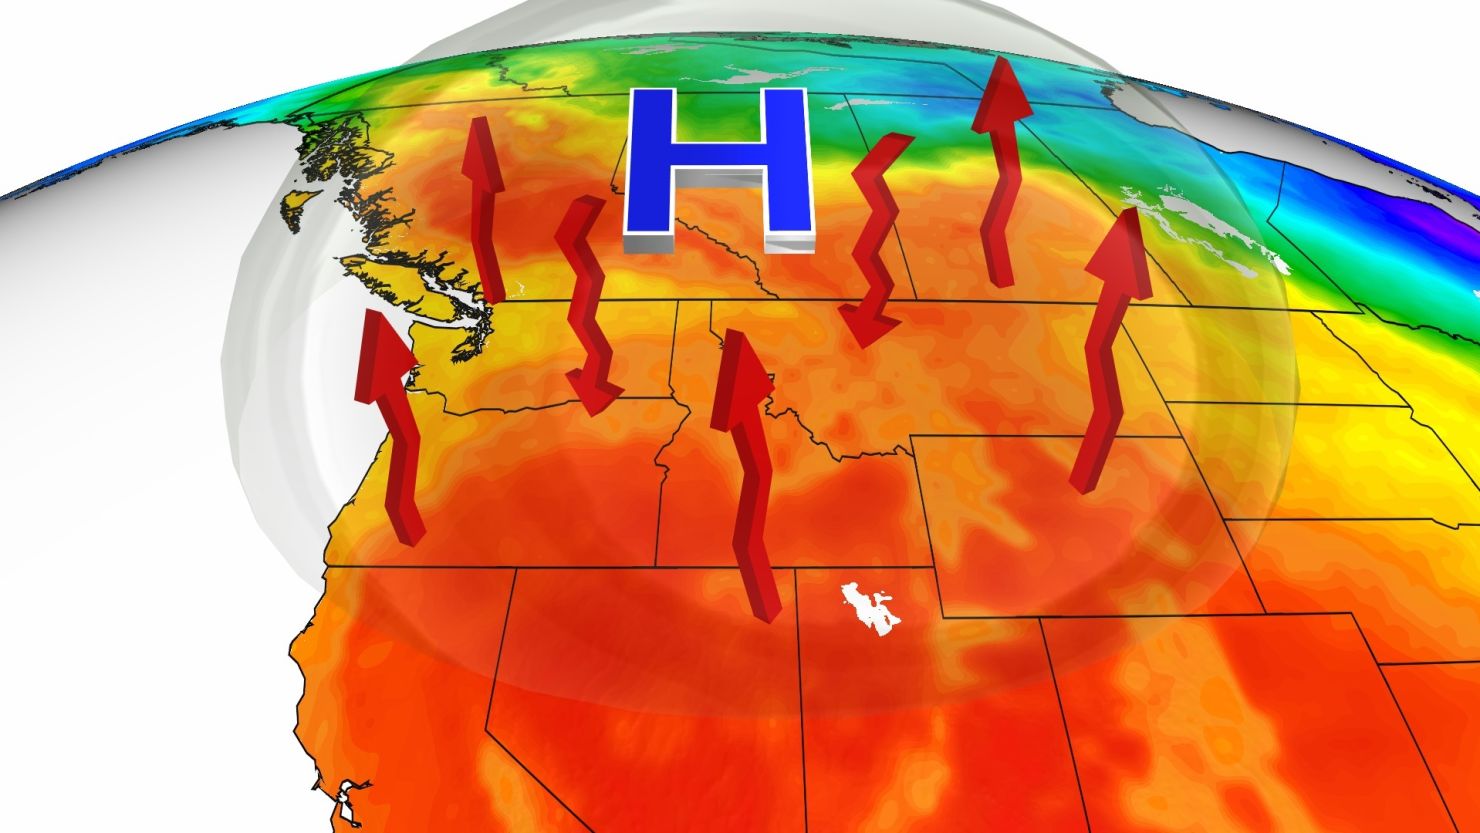 A dome of high pressure will cause summer-like heat to build across the Pacific Northwest and Canada through early next week.